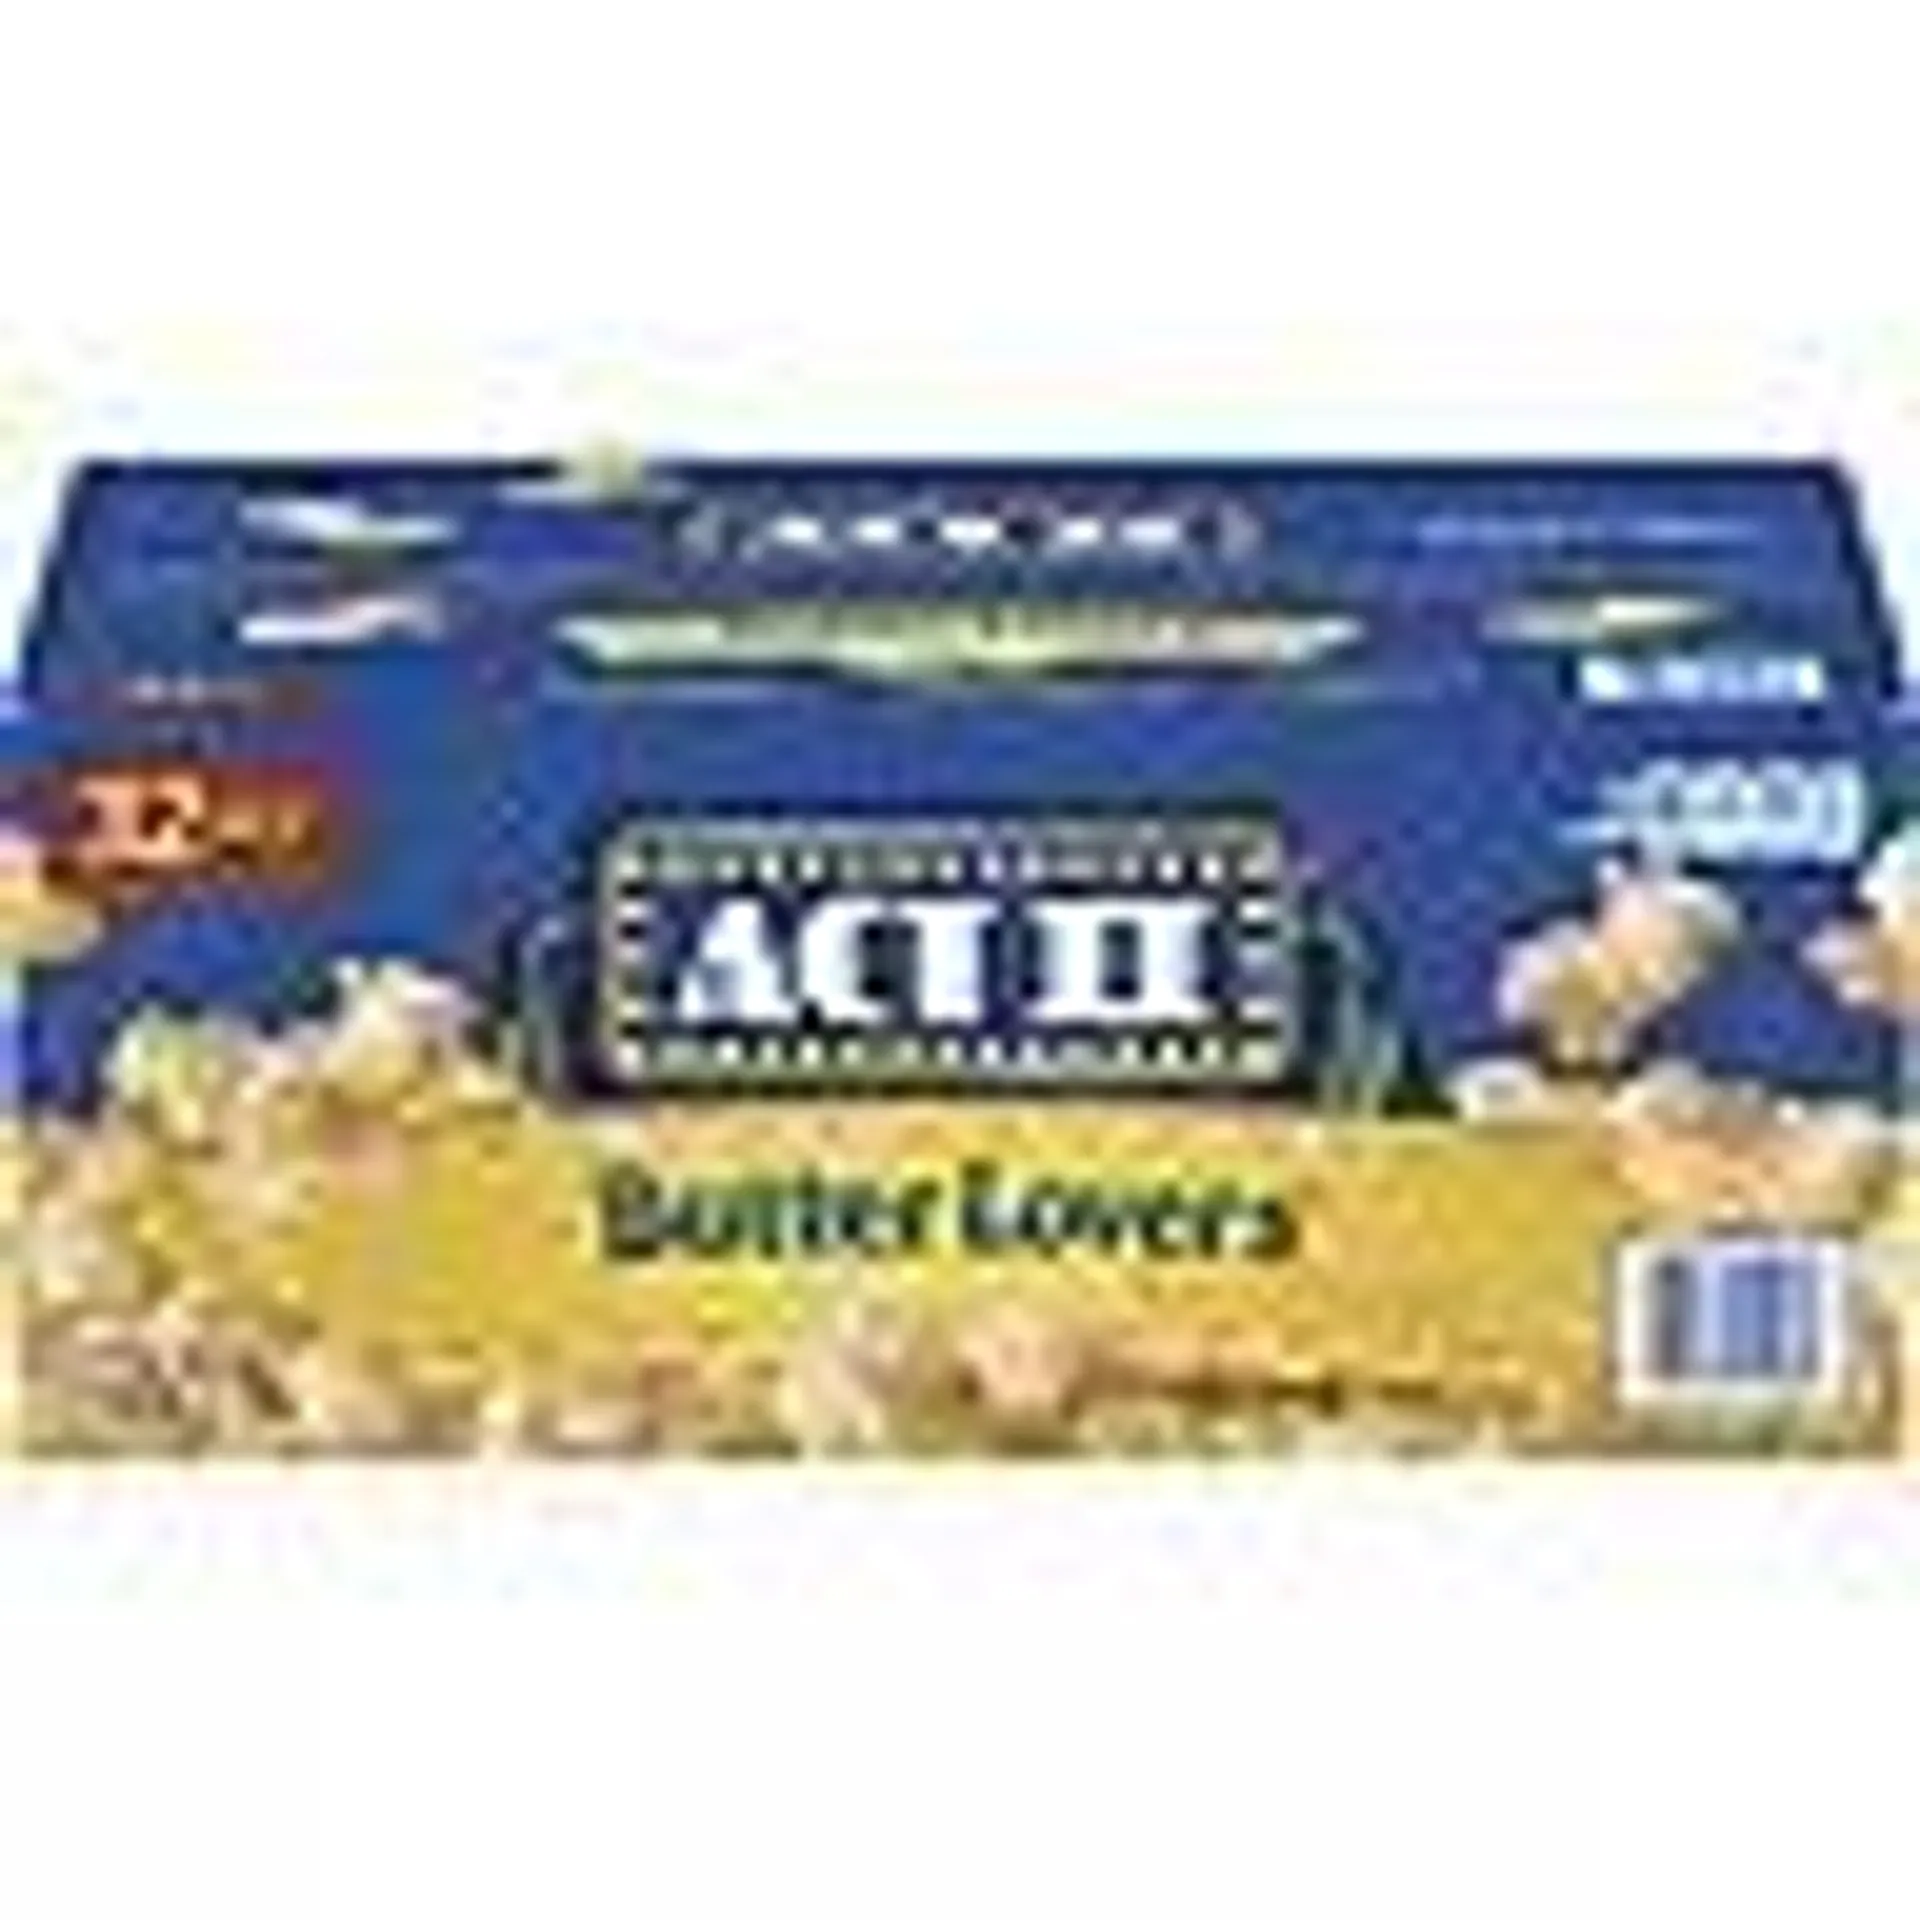 ACT II Butter Lovers Microwave Popcorn, 2.75 oz., 32 pk.